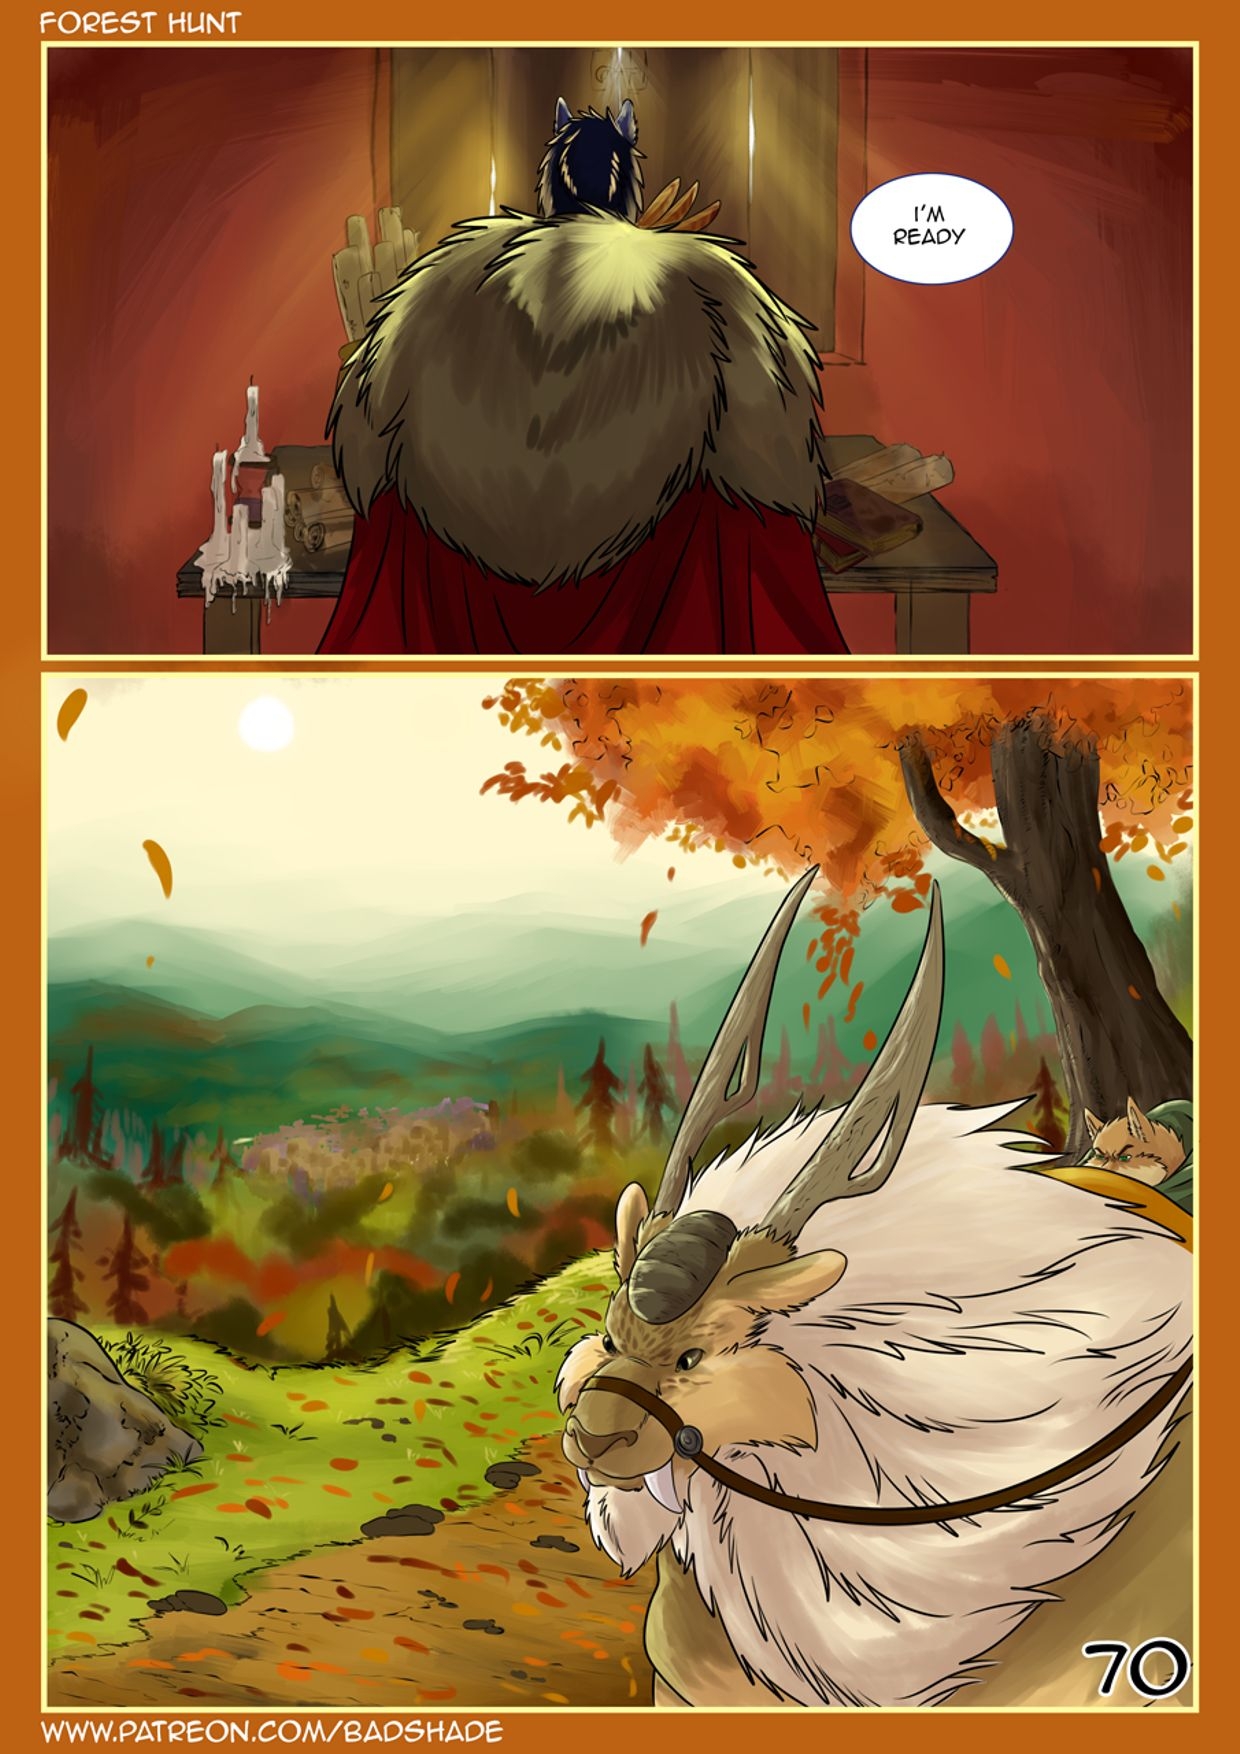 [Shade-The-Wolf] Forest Hunt (Eng)(WIP) 71